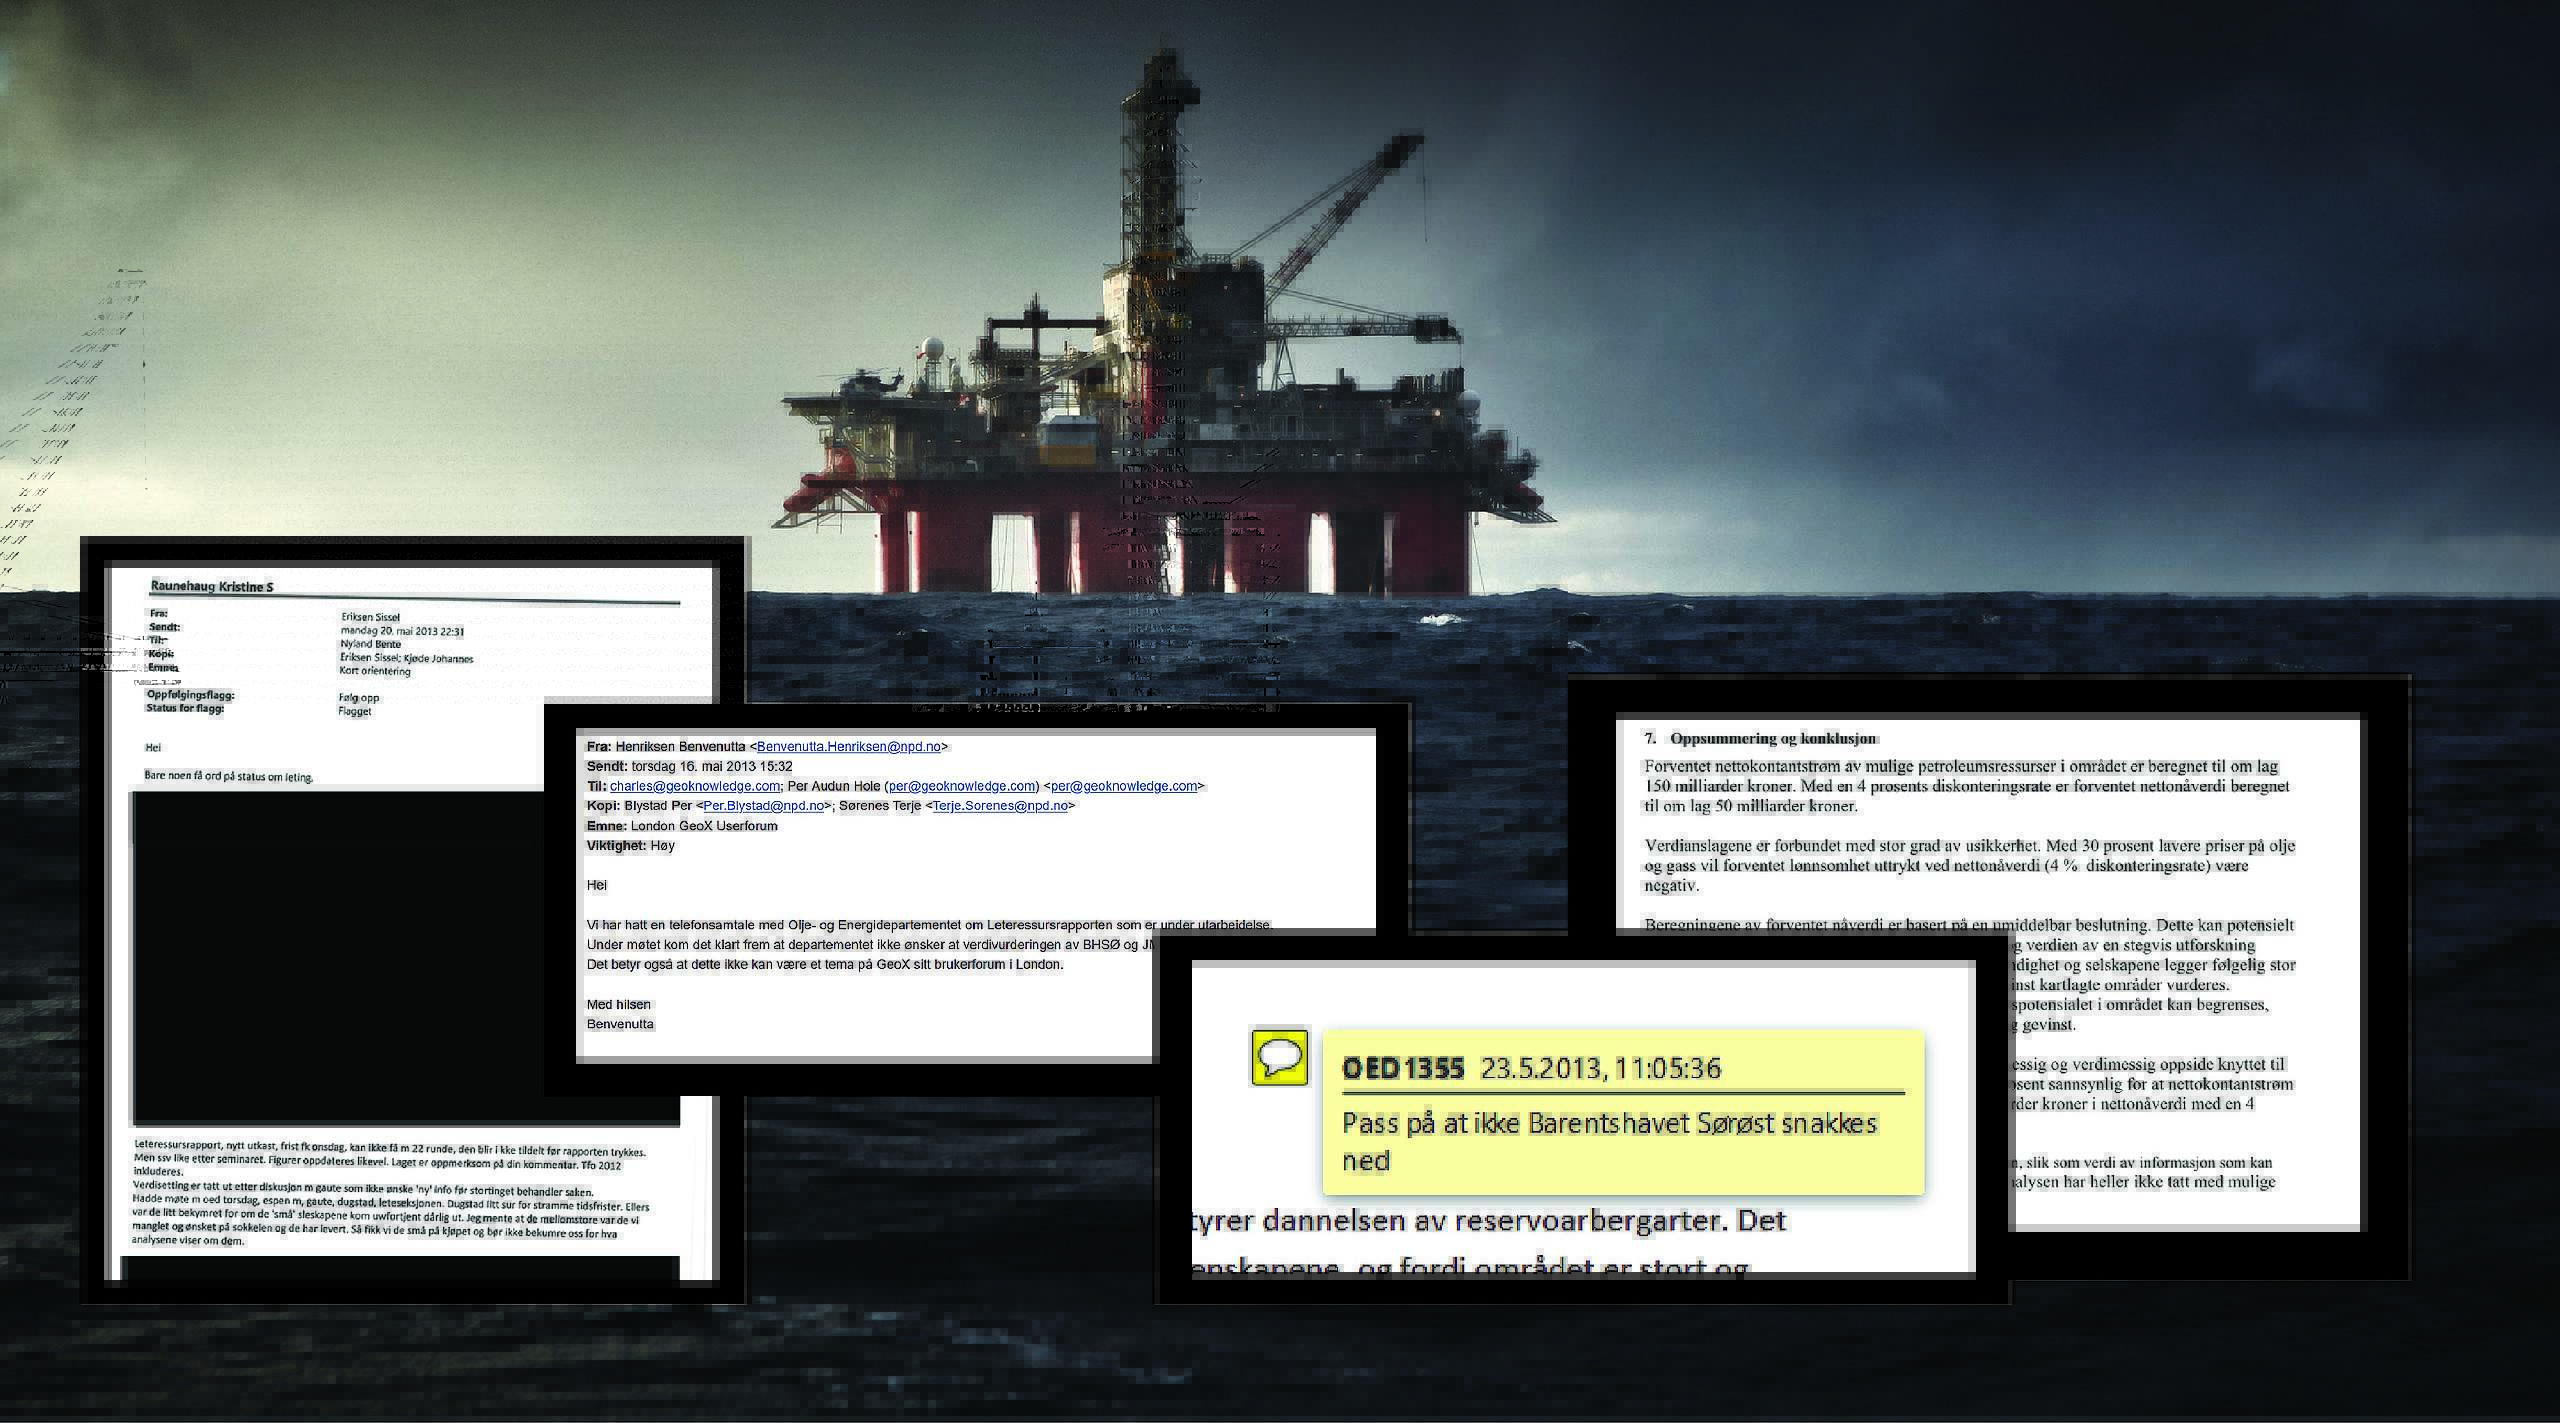 Secret report: Norwegian Government withheld information that oil 